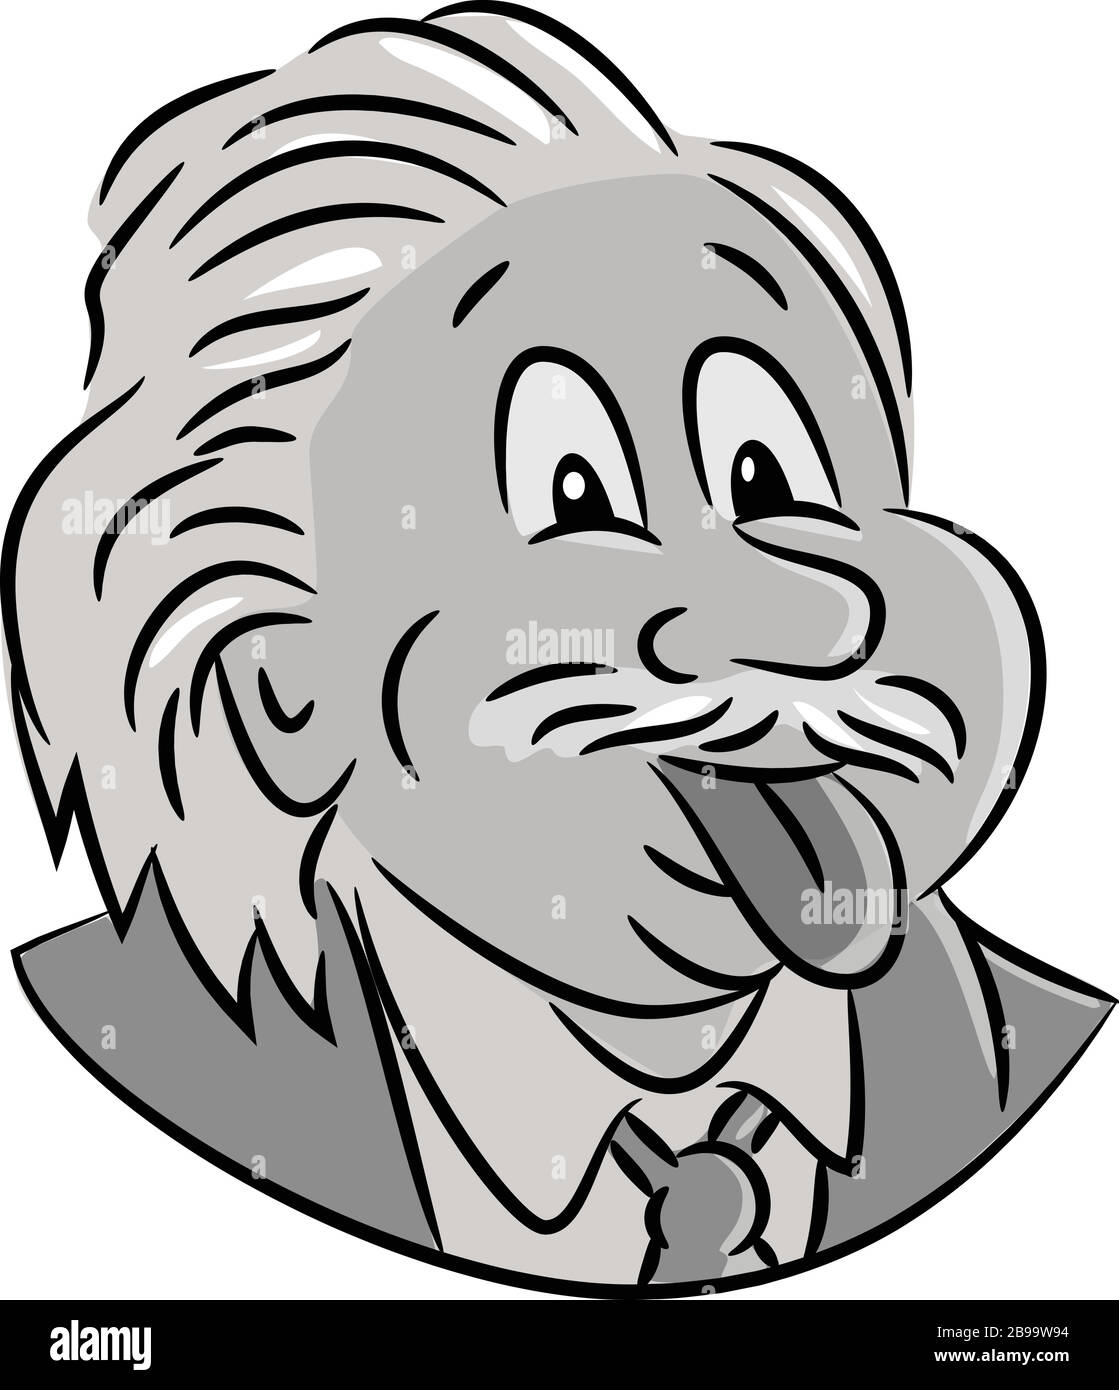 Cartoon style illustration of head of nerdy genius scientist Albert Einstein sticking his tongue out viewed from front on isolated white background. Stock Vector